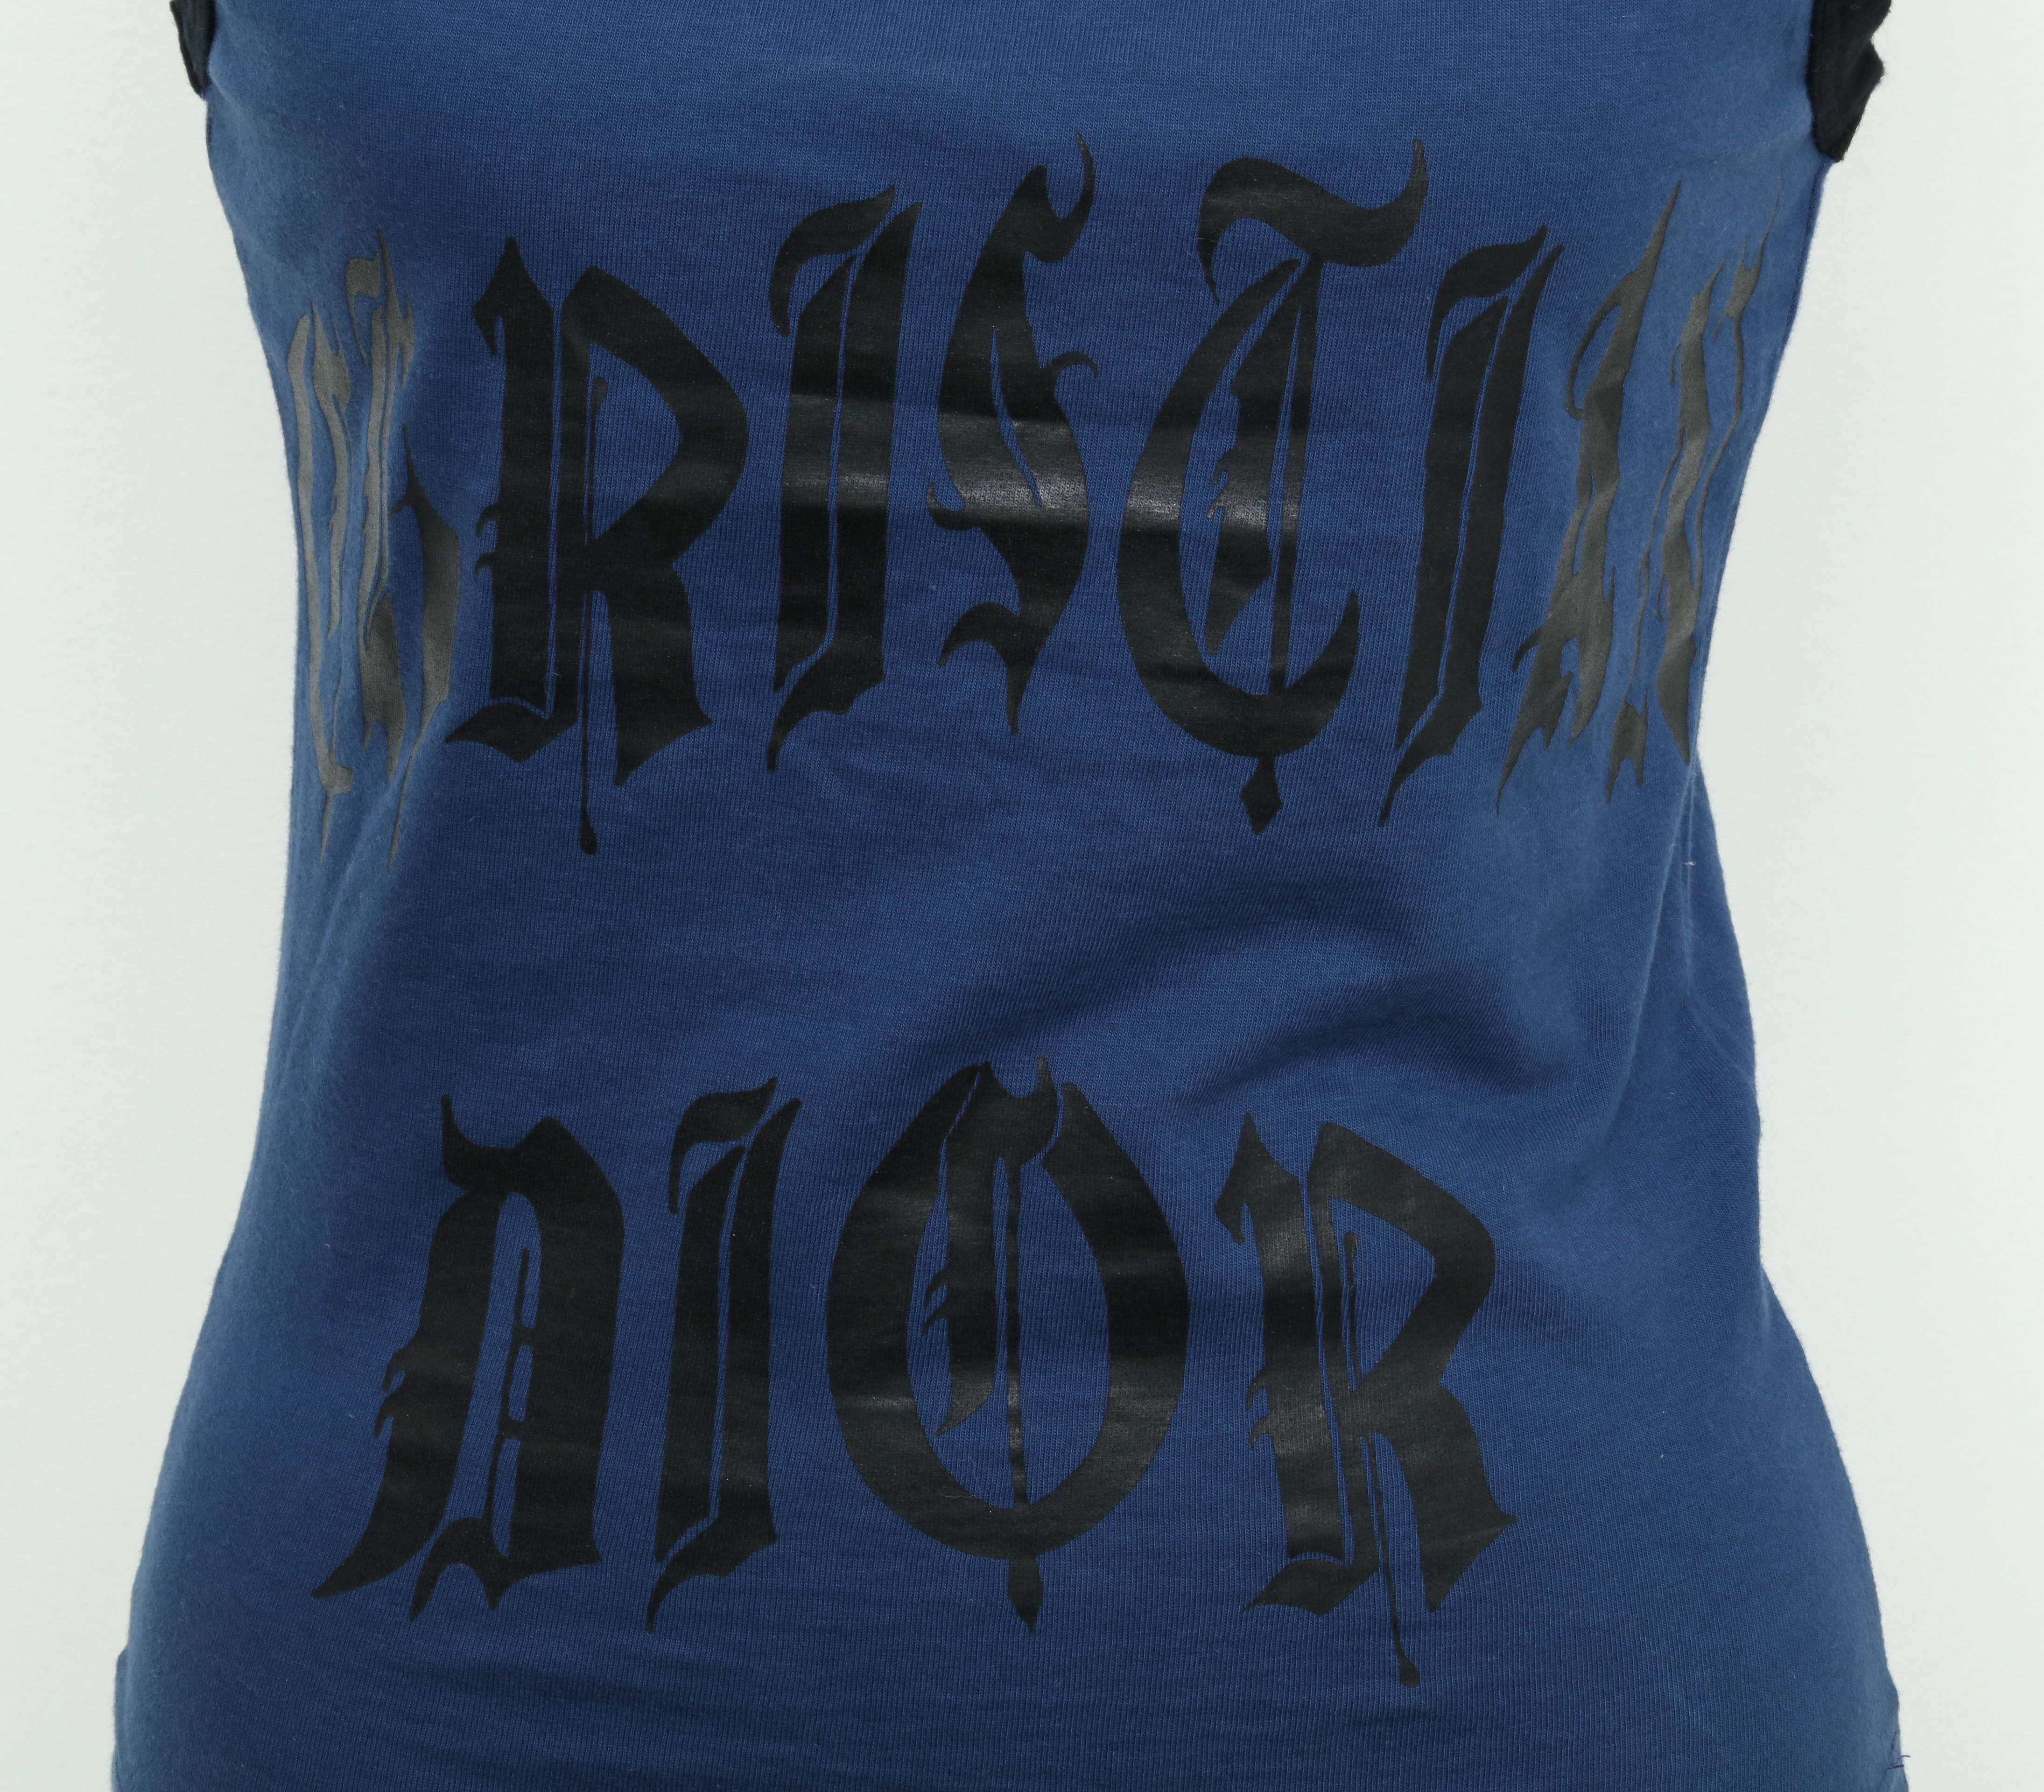 Christian Dior Blue/Black Tank Top with gothic logo. 

French Size 38.